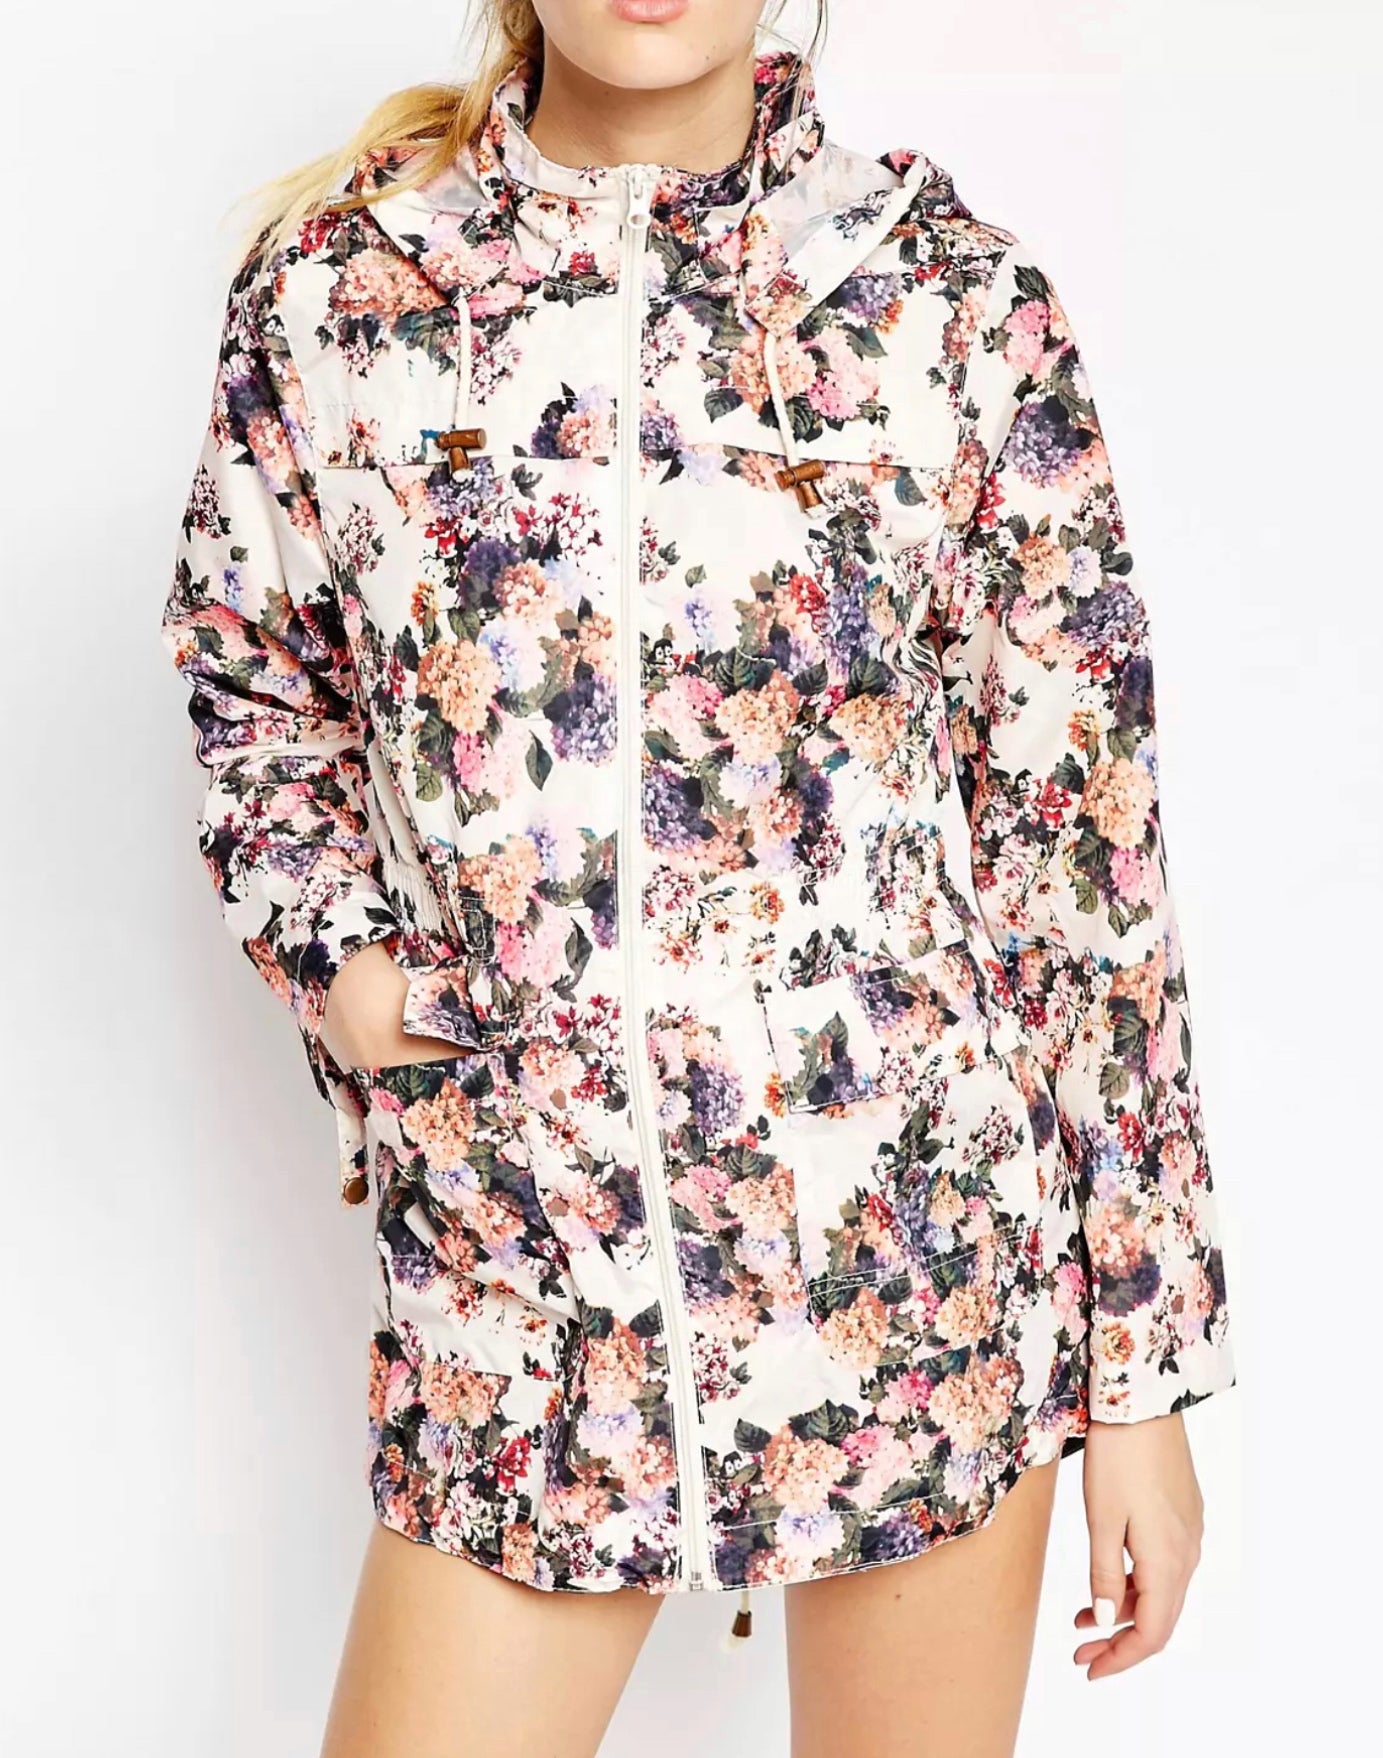 Rave All Over Floral Print Mac in Cream